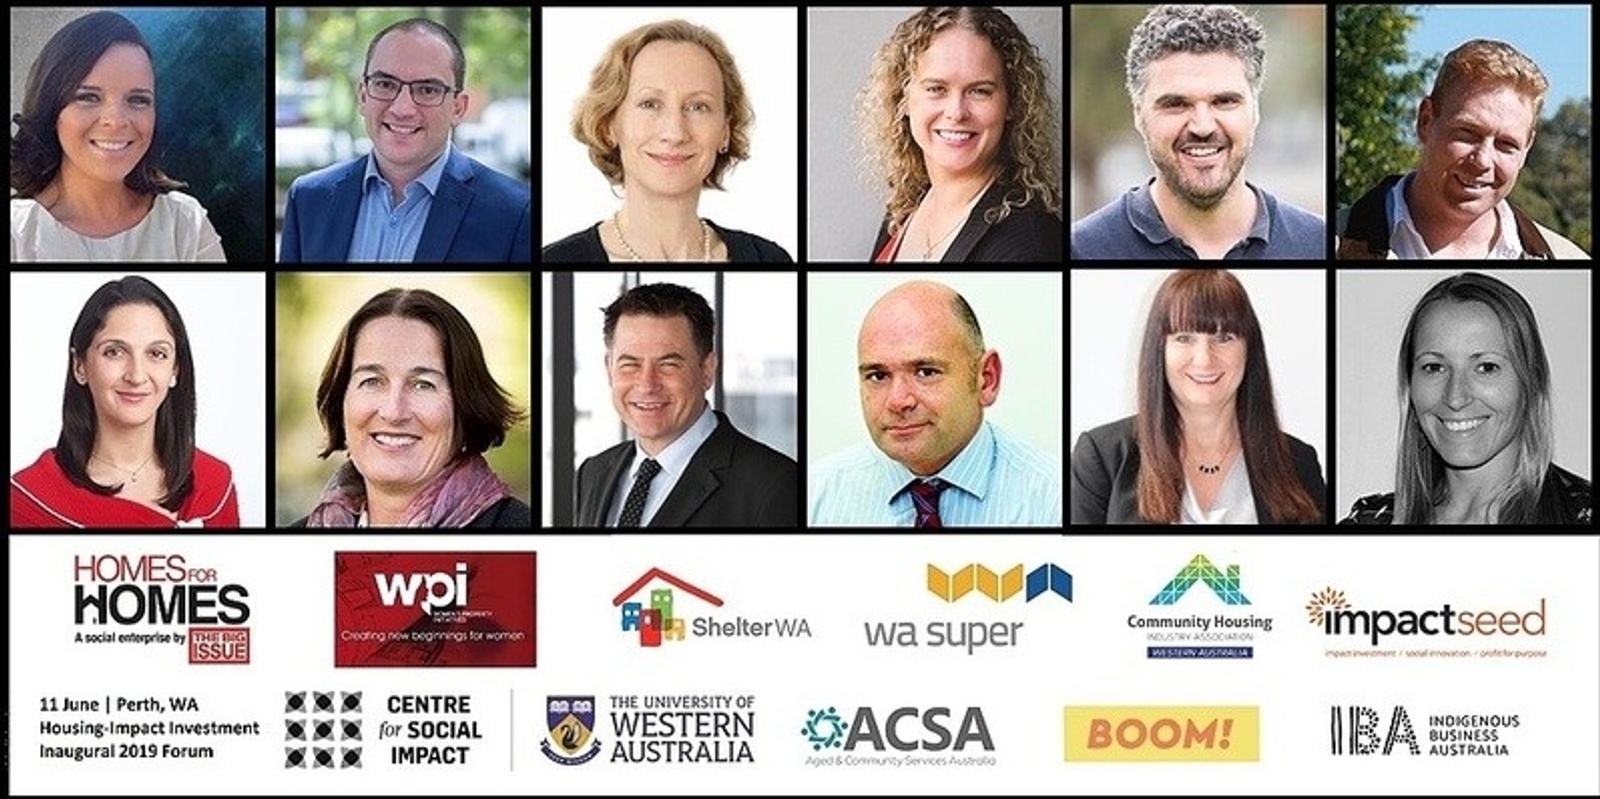 Banner image for 2019 Forum on Housing-Impact Investment in WA